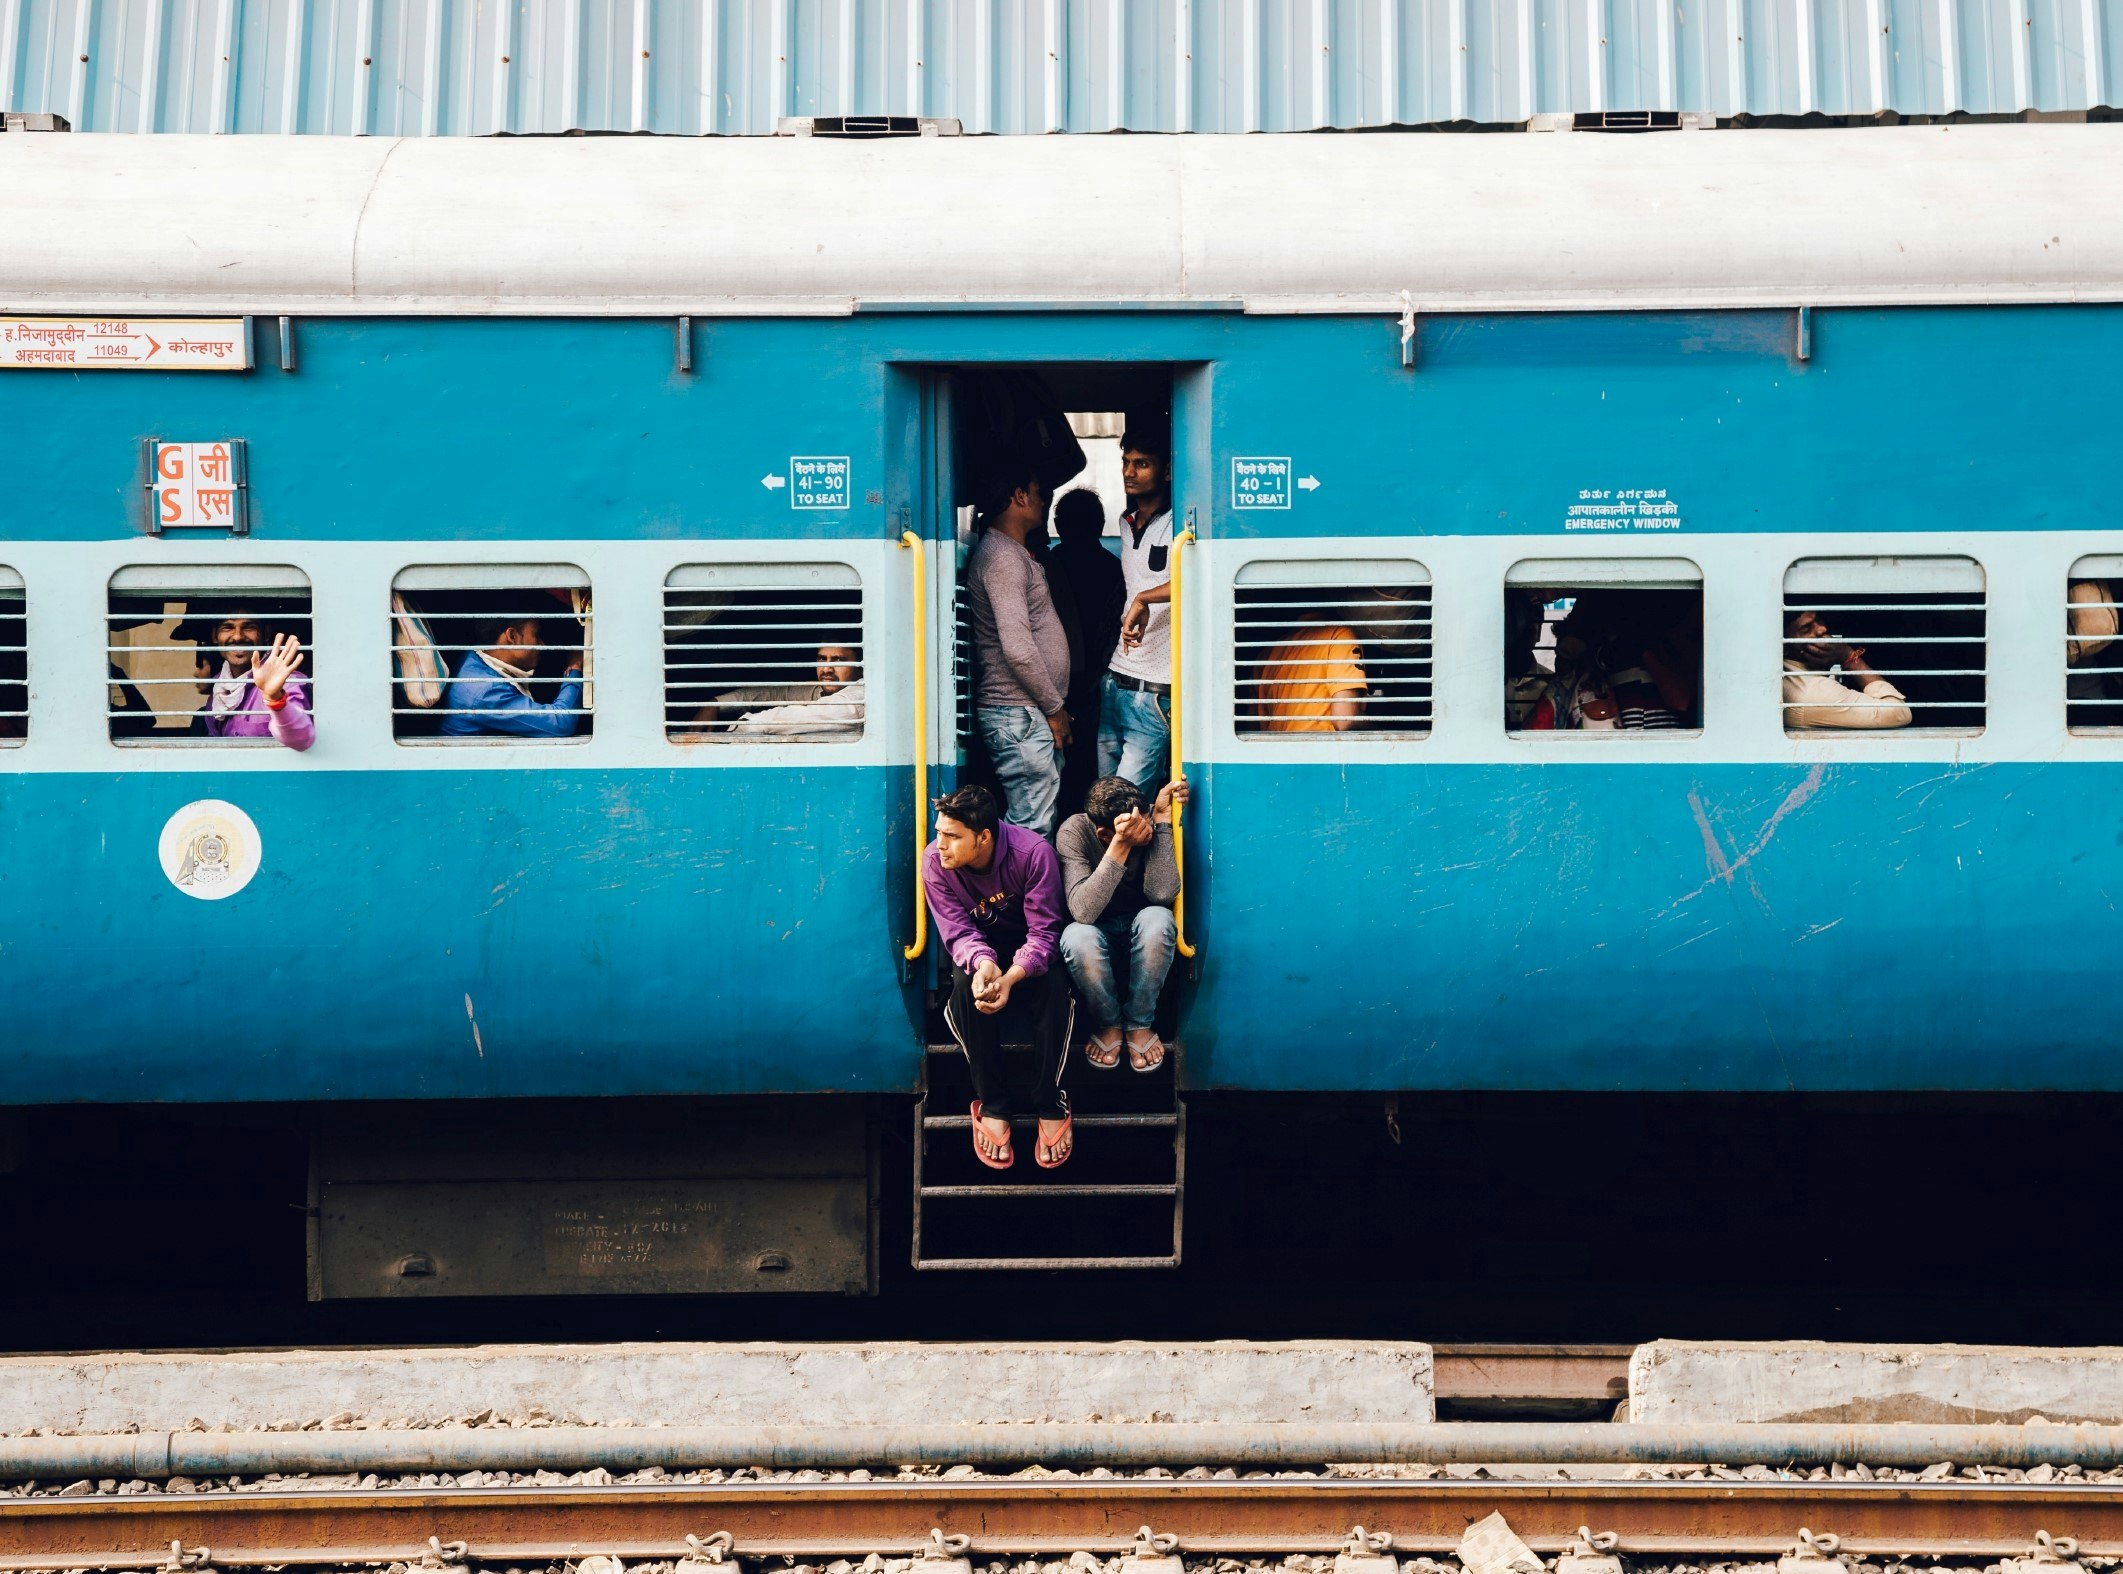 A stationary blue train in India, with passengers sitting and leaning out of the doorway and looking through the train's windows.